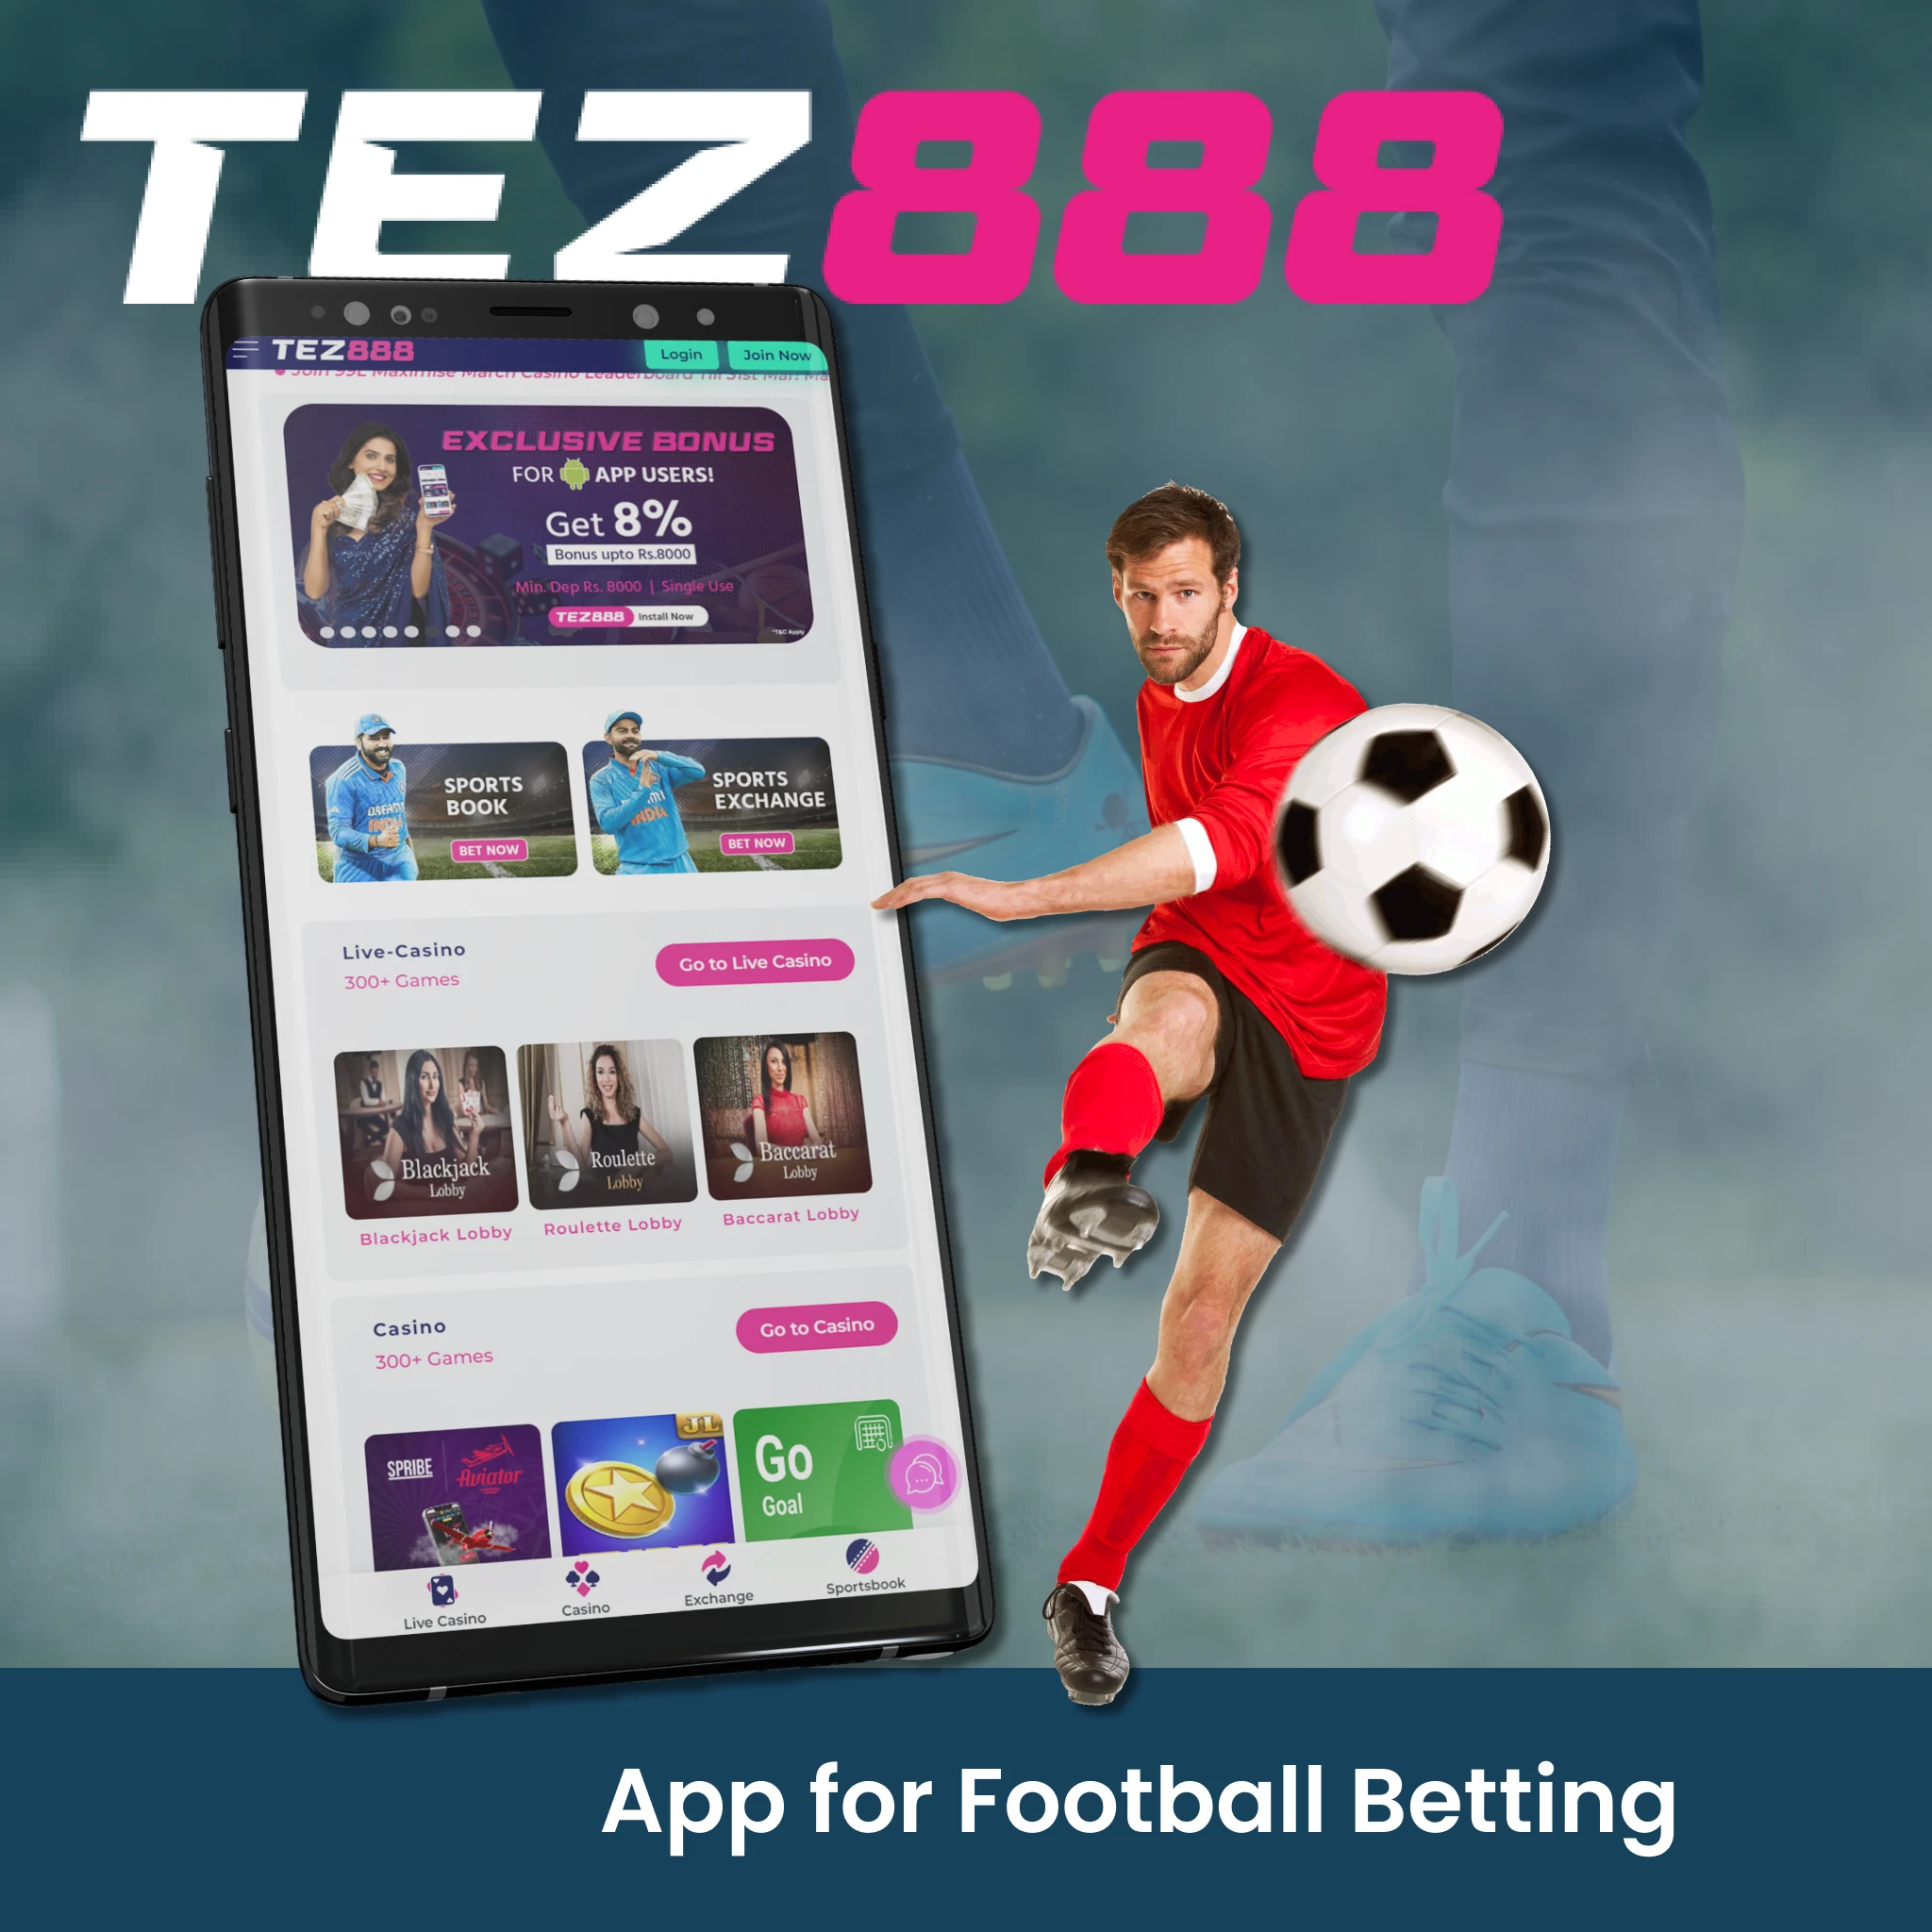 Tez888 app stands out as an ideal option for football fans, offering a wide array of features and opportunities tailored to their specific interests.